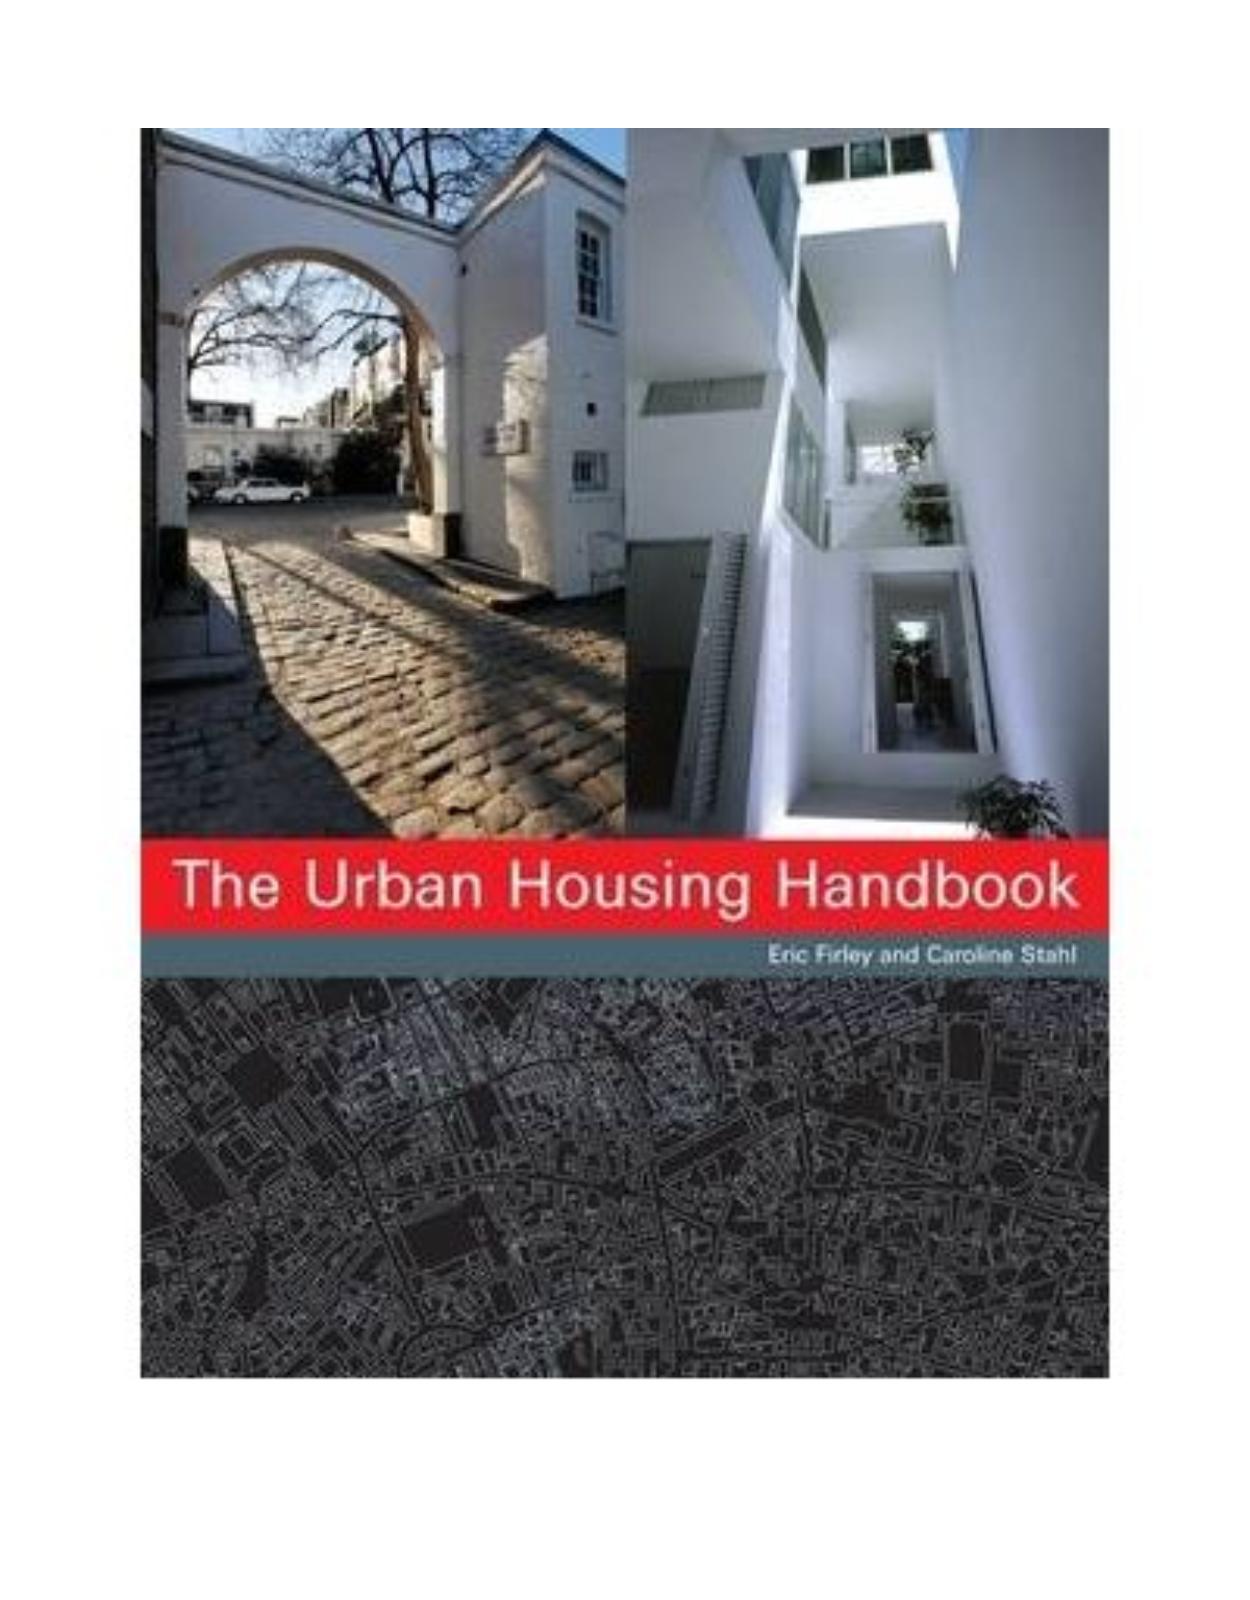 The Urban Housing Handbook: Shaping the Fabric of Our Cities